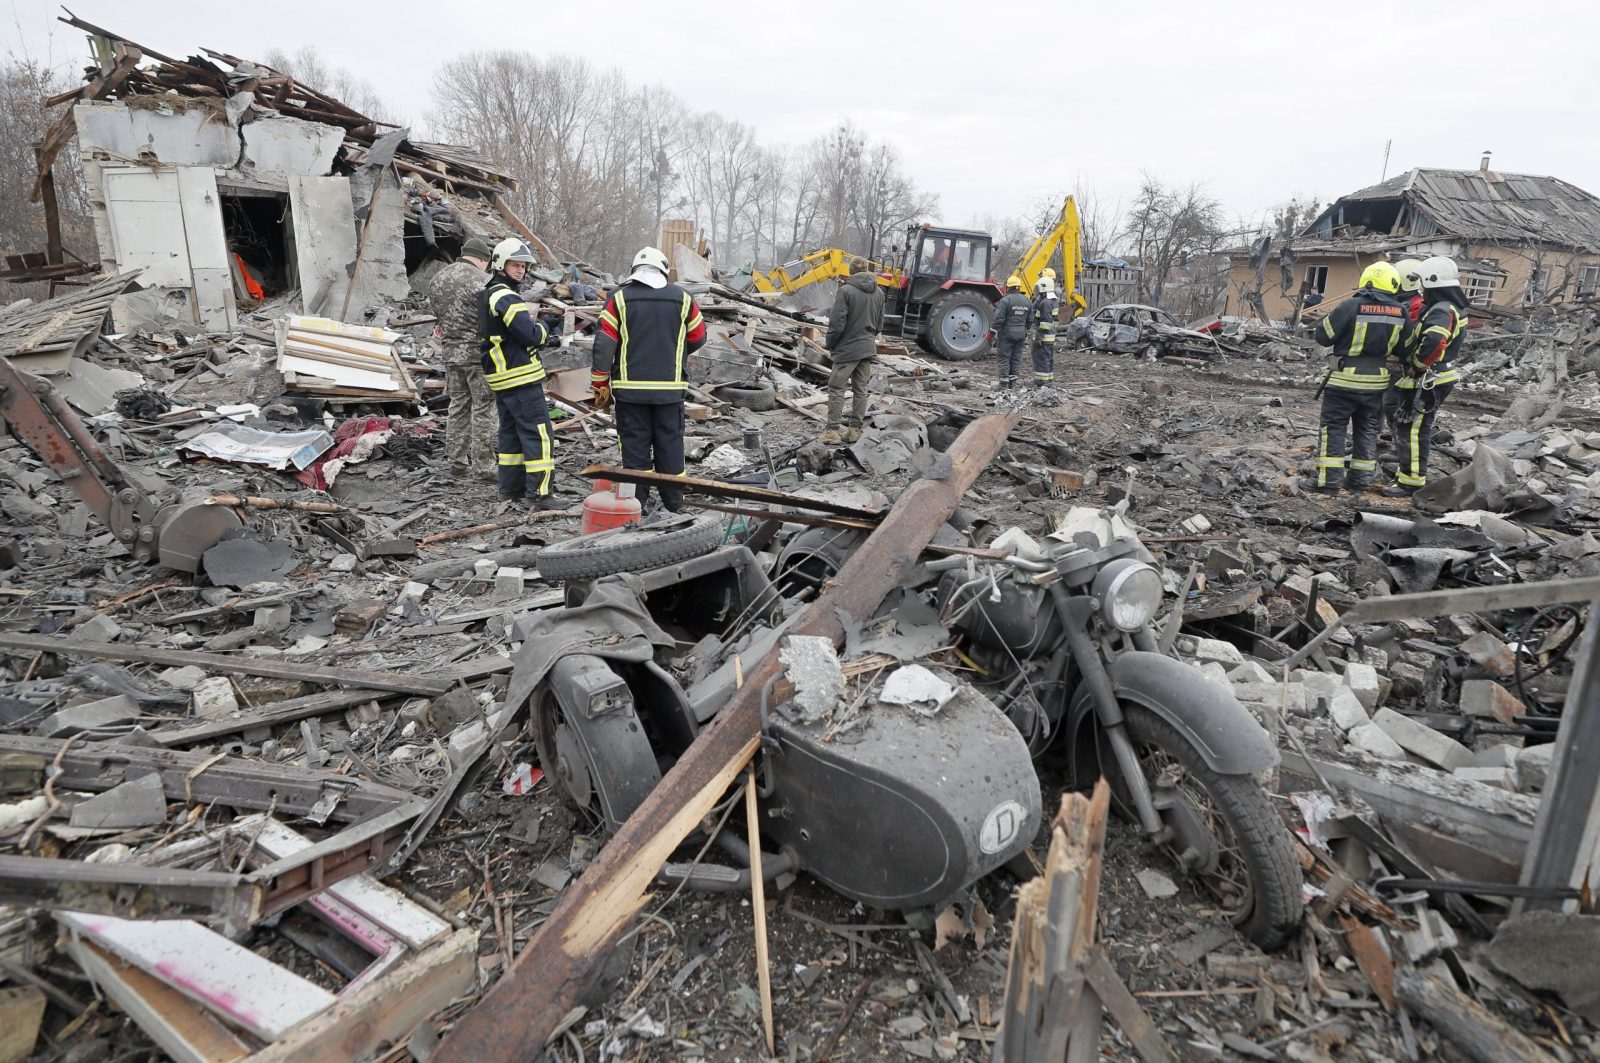 epa10381414 Ukrainian rescue workers at the scene of a destroyed residential building following a Russian missile strike in the outskirts of Kyiv, Ukraine, 29 December 2022. Russian missiles targeted major cities across Ukraine early 29 December, the head of the Kyiv City Military Administration, Serhiy Popko wrote on telegram that 16 missiles targeting the Ukrainian capital Kyiv have been destroyed, and that at least three people were injured. The city Mayor, Vitali Klitschko said that 40 percent of the capital's consumers were without electricity after the attacks.  EPA/SERGEY DOLZHENKO